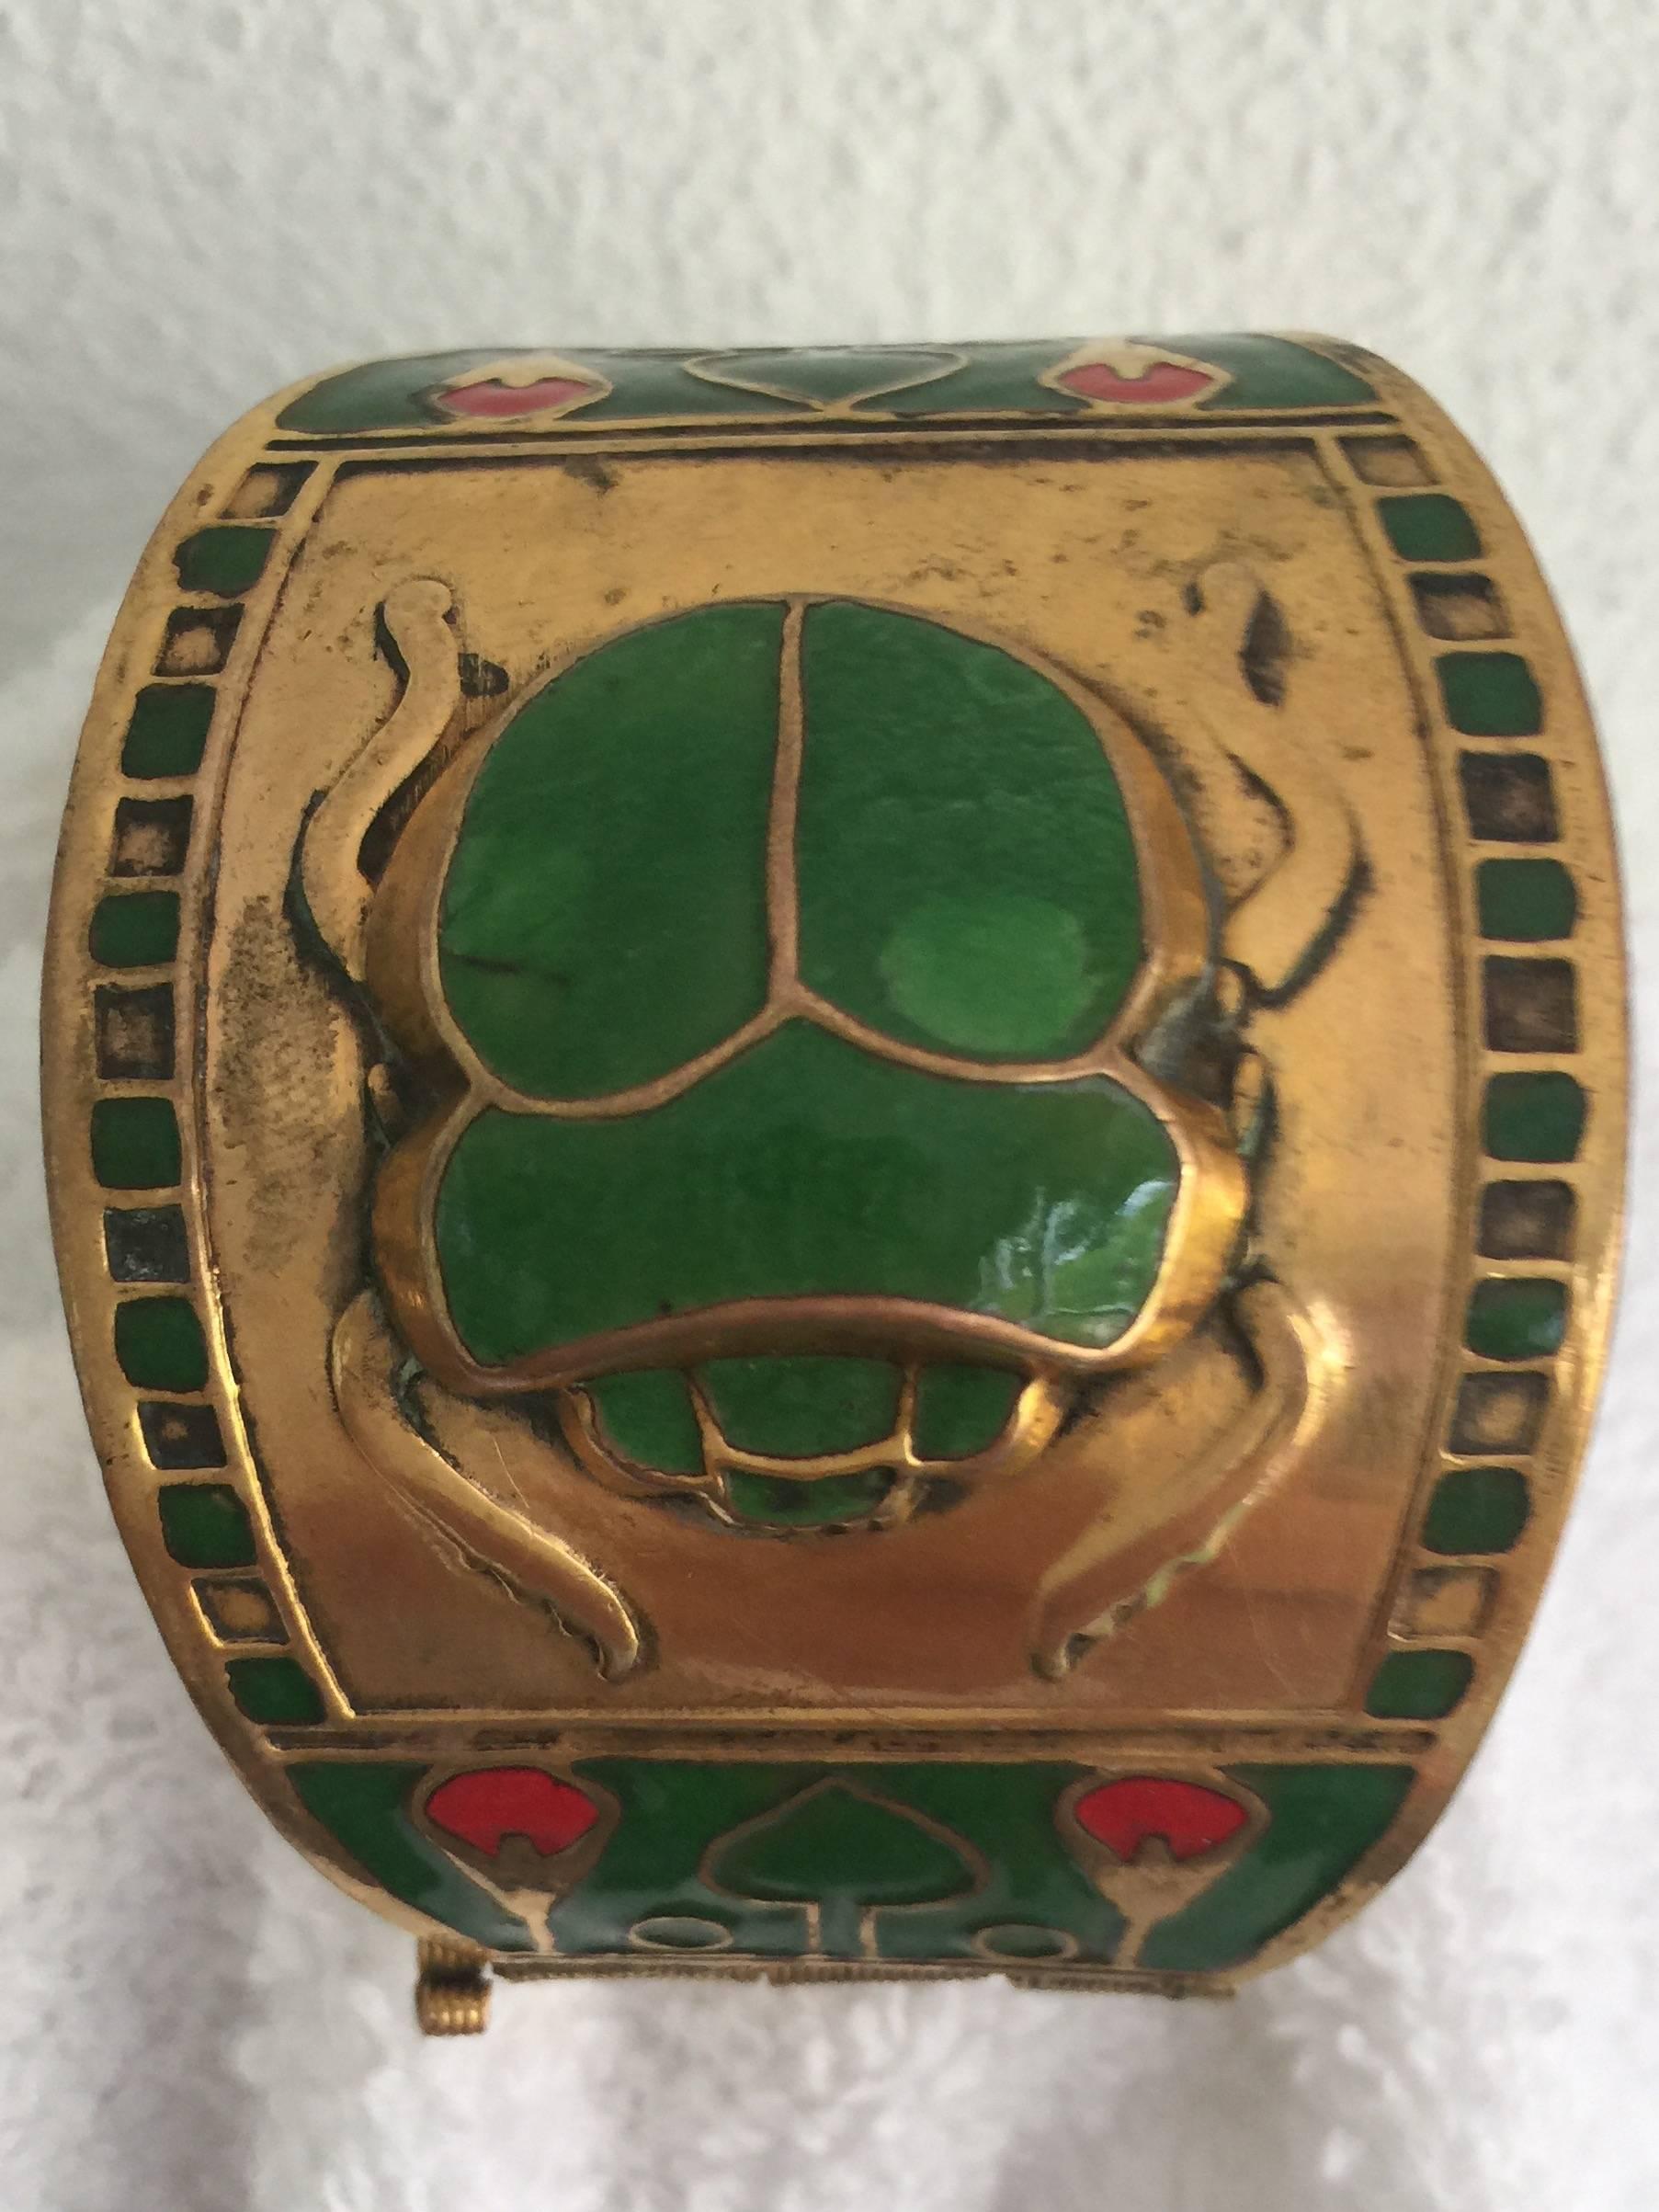 An Egyptian revival style cuff in enamel and brass. Beautifully designed with a scarab and lotus motif. 
The design is highlighted by the vibrant and complimentary colors.
Hinged with a pin closure.
Beautiful piece of jewlery.
Seems to have an